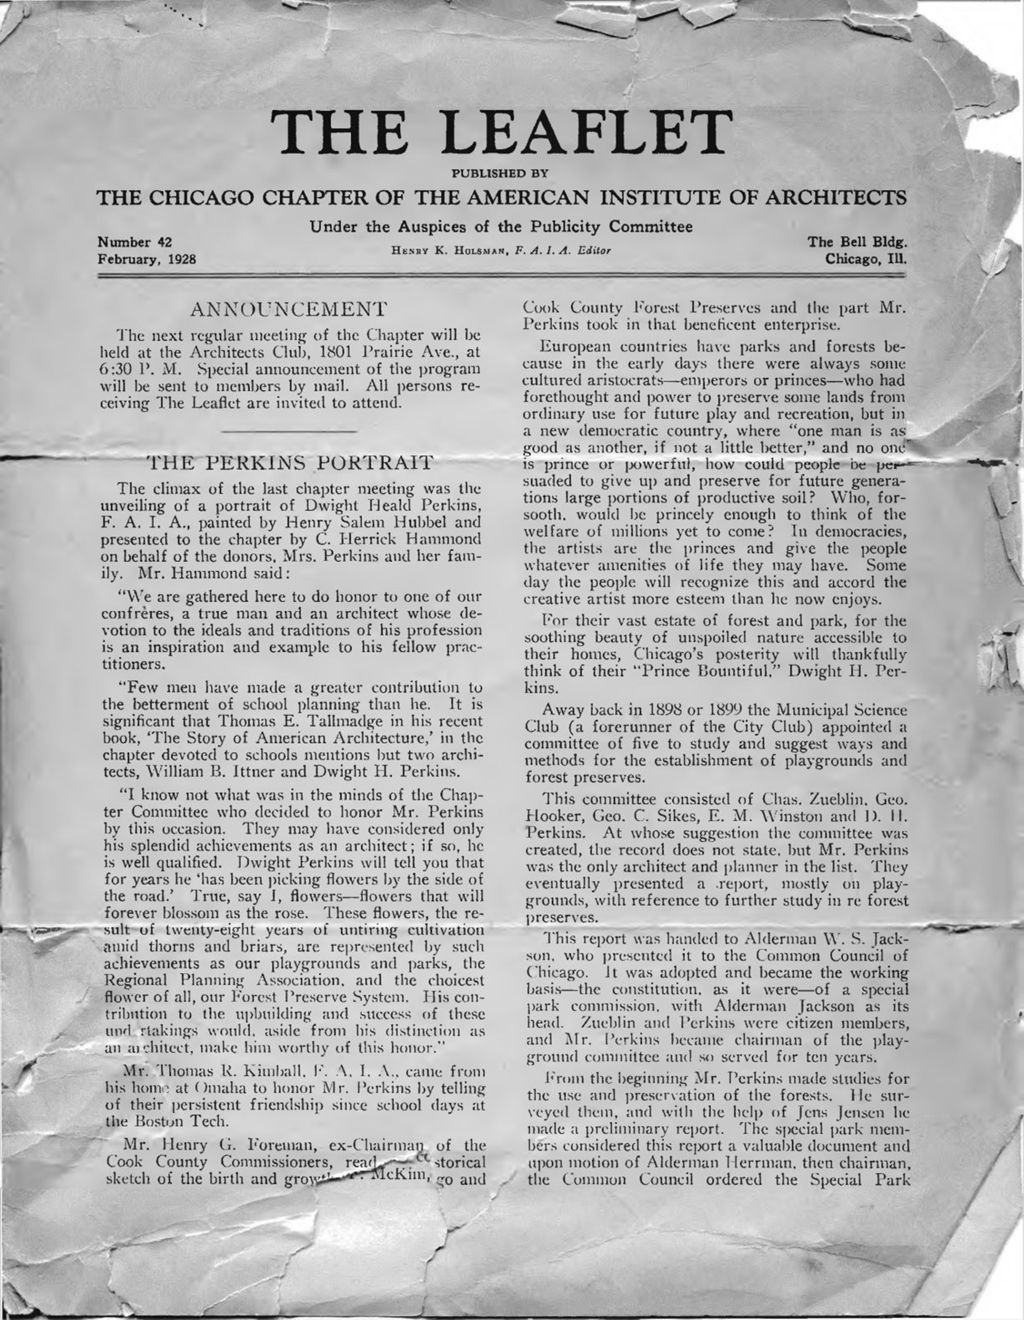 Miniature of The Leaflet, newsletter for the Chicago Chapter of the American Institute of Architects, 1928